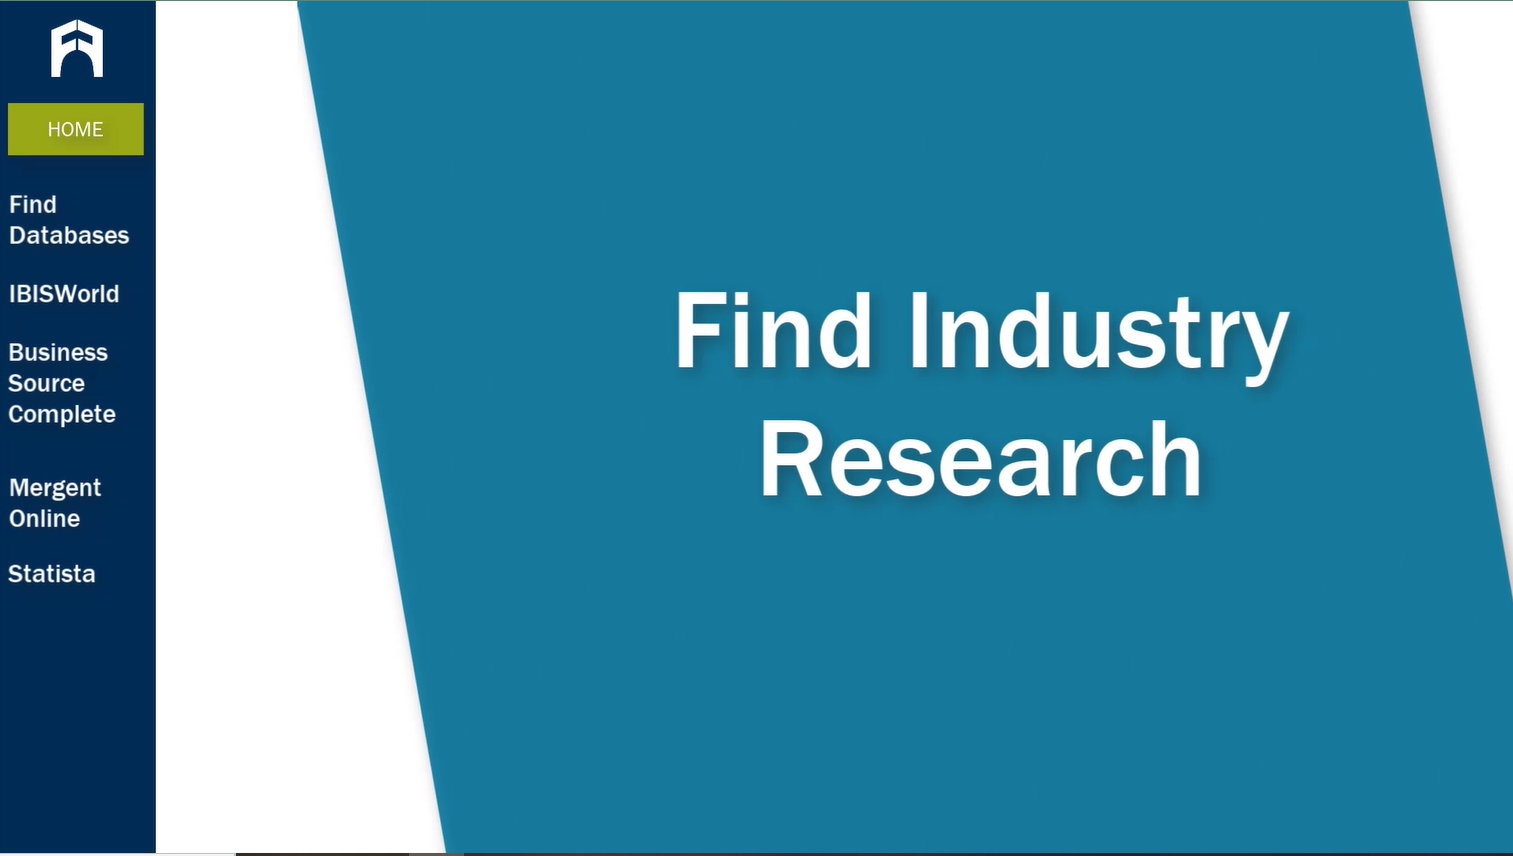 Find Industry Research Tutorial